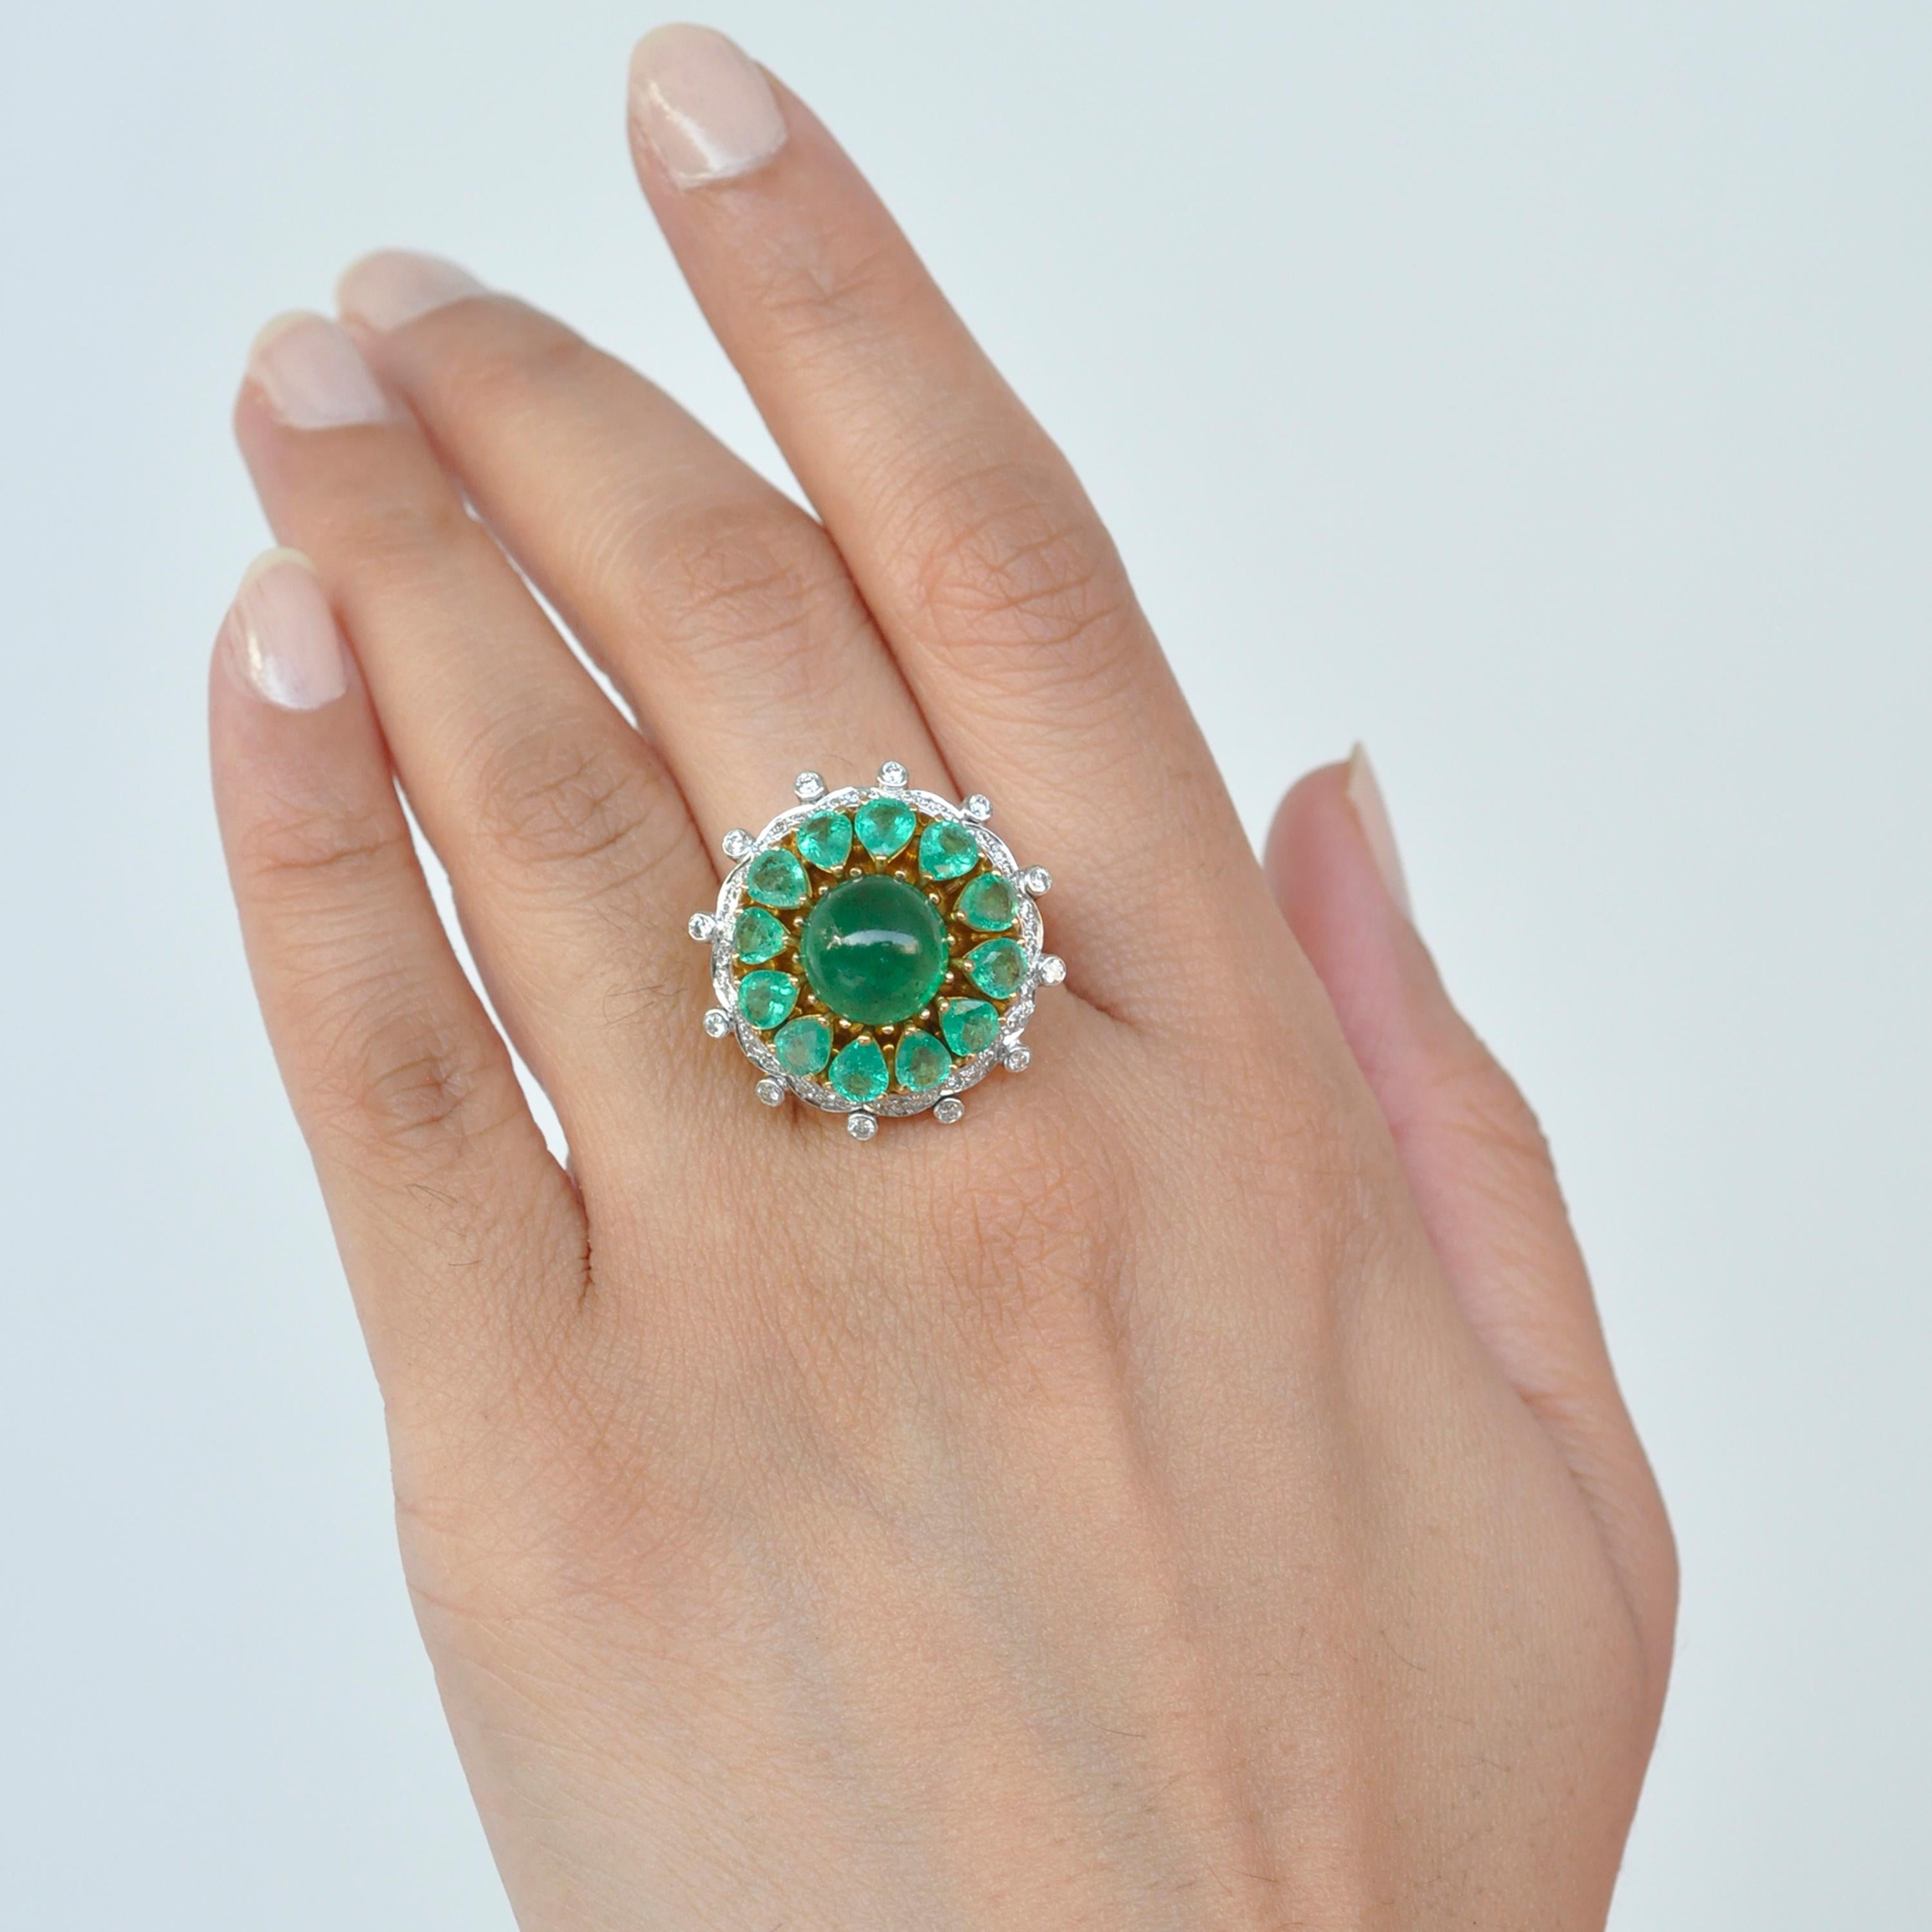 18 karat yellow gold zambian emerald cabochon diamond dome cocktail ring.

Made with the finest of metal alloys, this stamped 18 karat gold zambian emerald diamond dome cocktail ring is indeed a statement ring. Pear shaped lustrous emerald surround